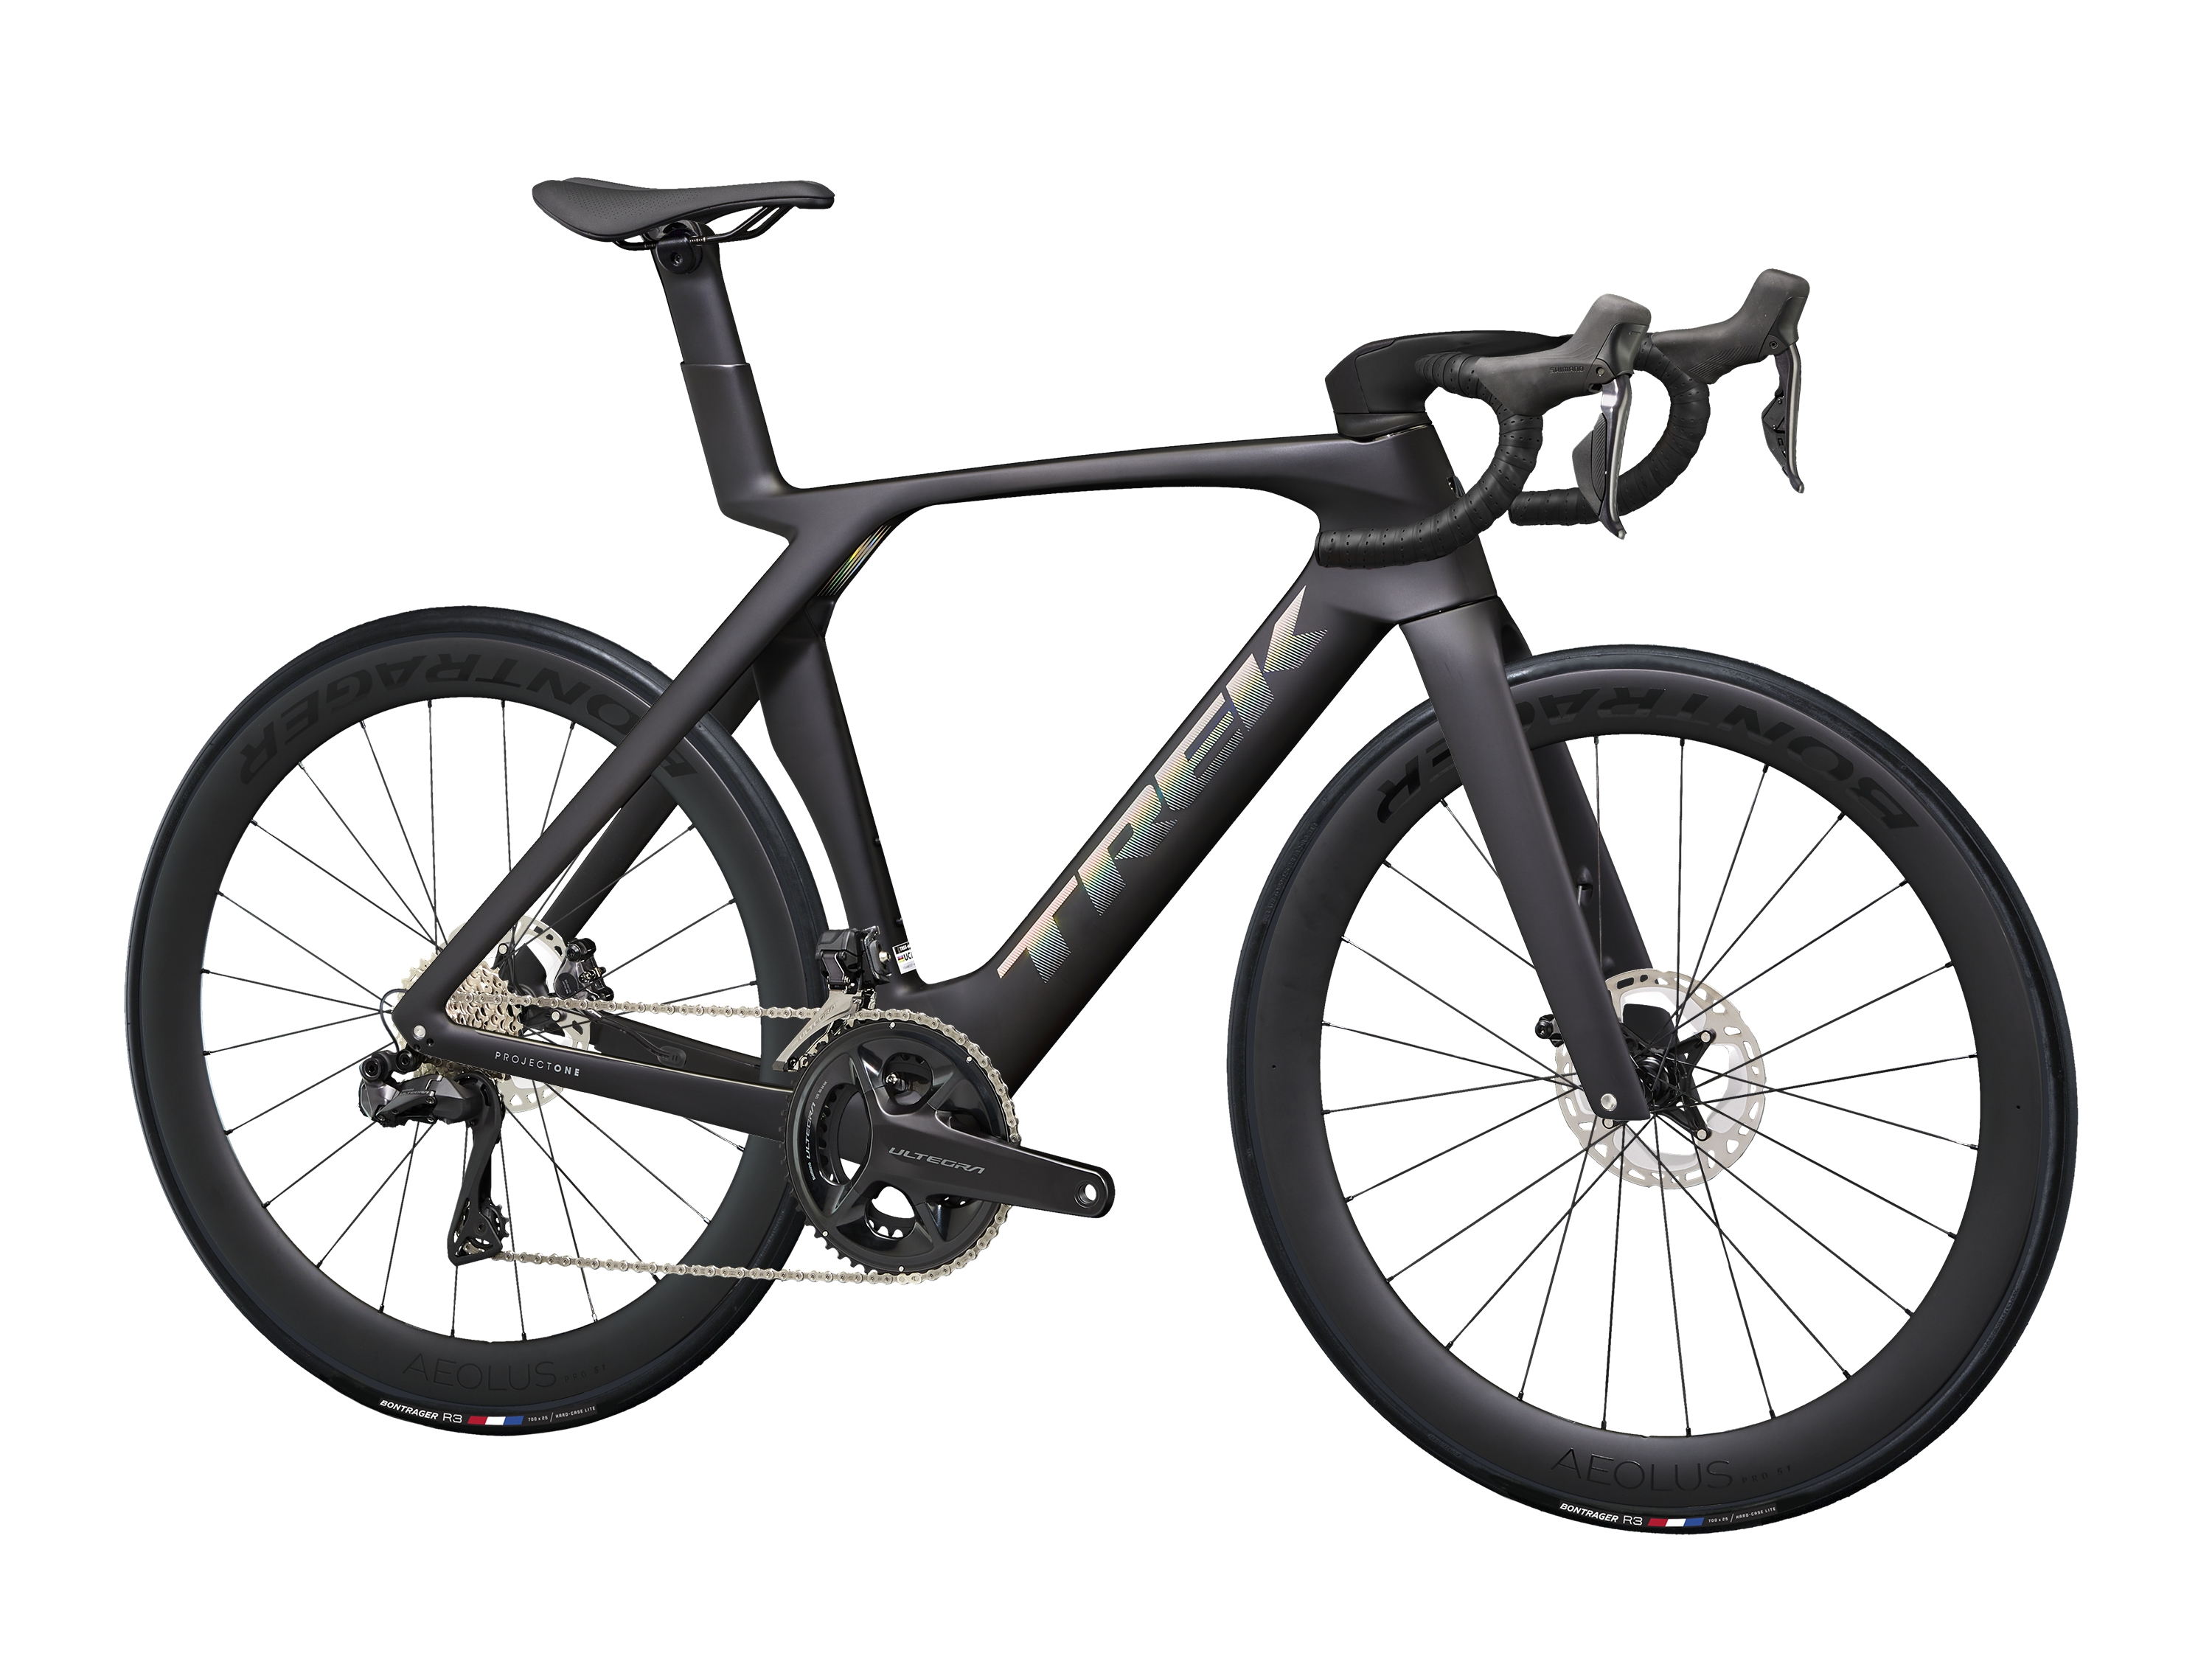 <a href="https://cycles-clement.be/product/madone-slr-7-56-deep-smoke/">MADONE SLR 7 56 DEEP SMOKE</a>